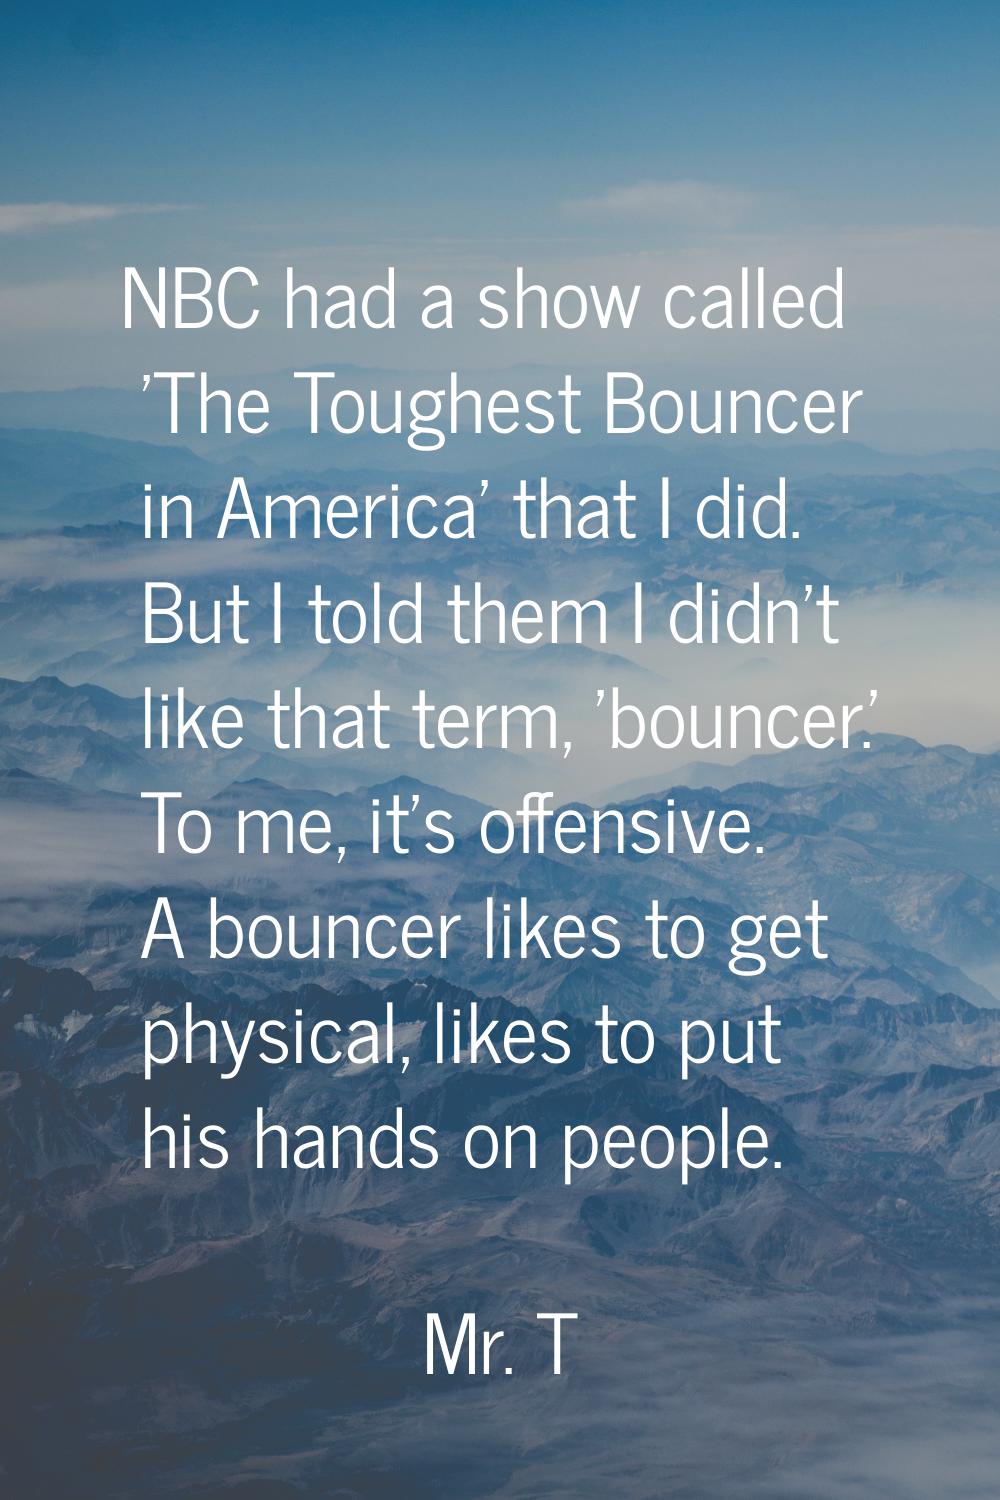 NBC had a show called 'The Toughest Bouncer in America' that I did. But I told them I didn't like t